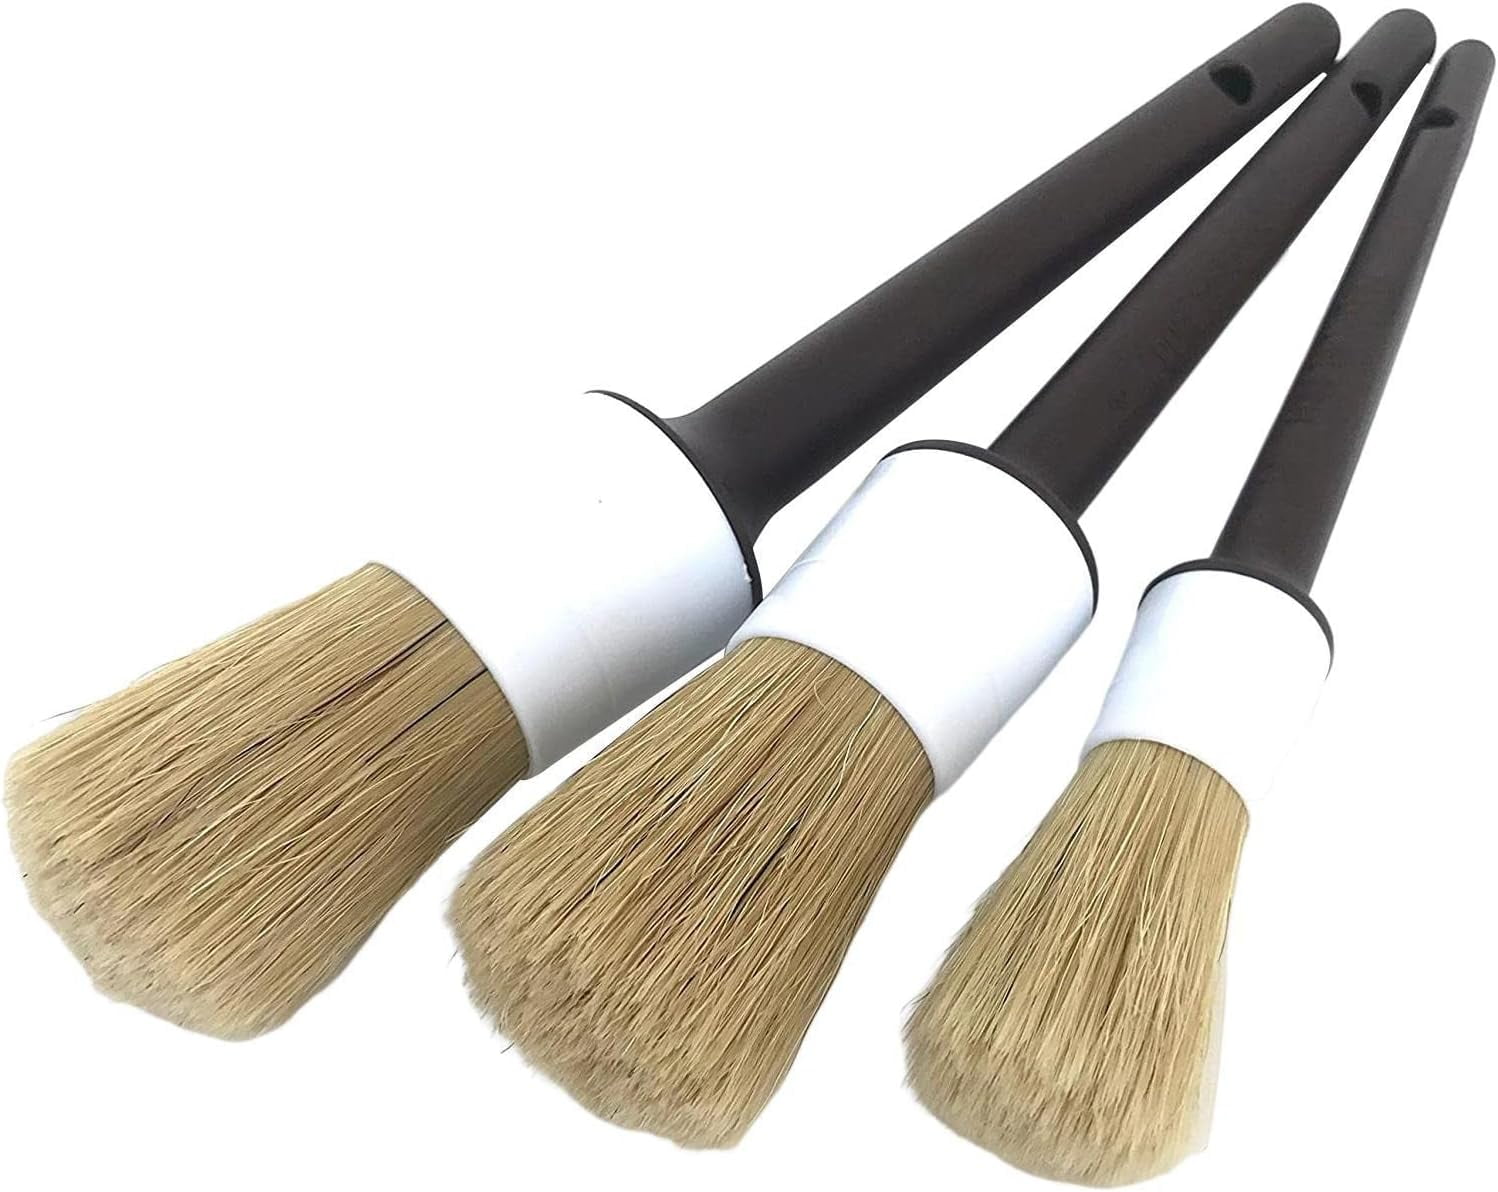 BMLEI 5pcs Car Detailing Brushes Set, Boars Hair Auto Car Detail Brush Kit  No Scratch, Ultra Soft Car Duster Brushes Perfect for Interior, Exterior